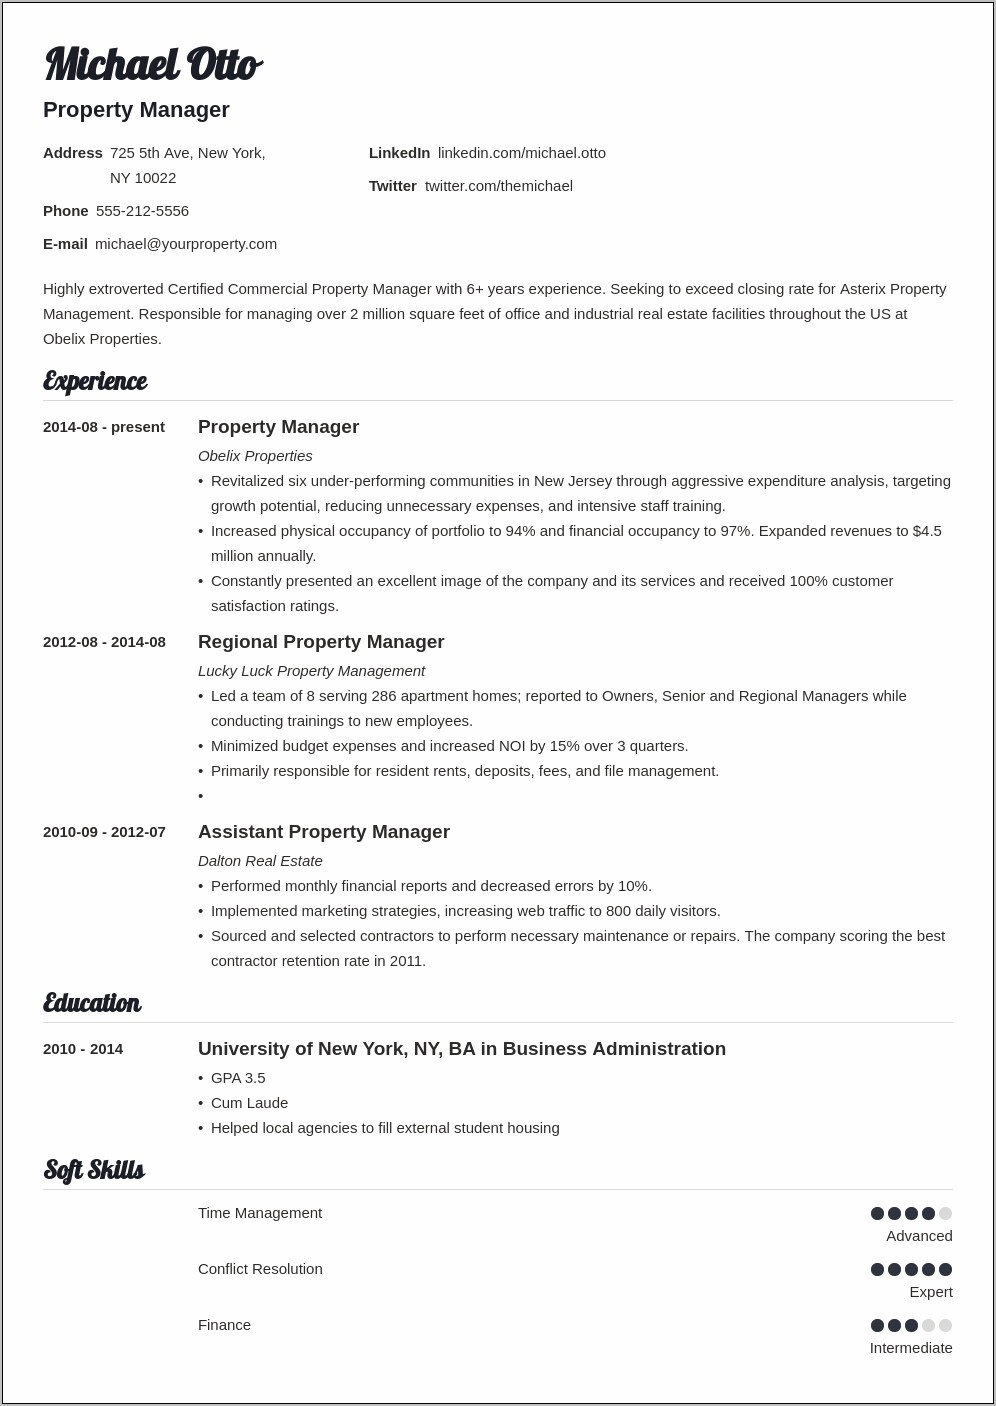 Duties Of A Property Manager Resume